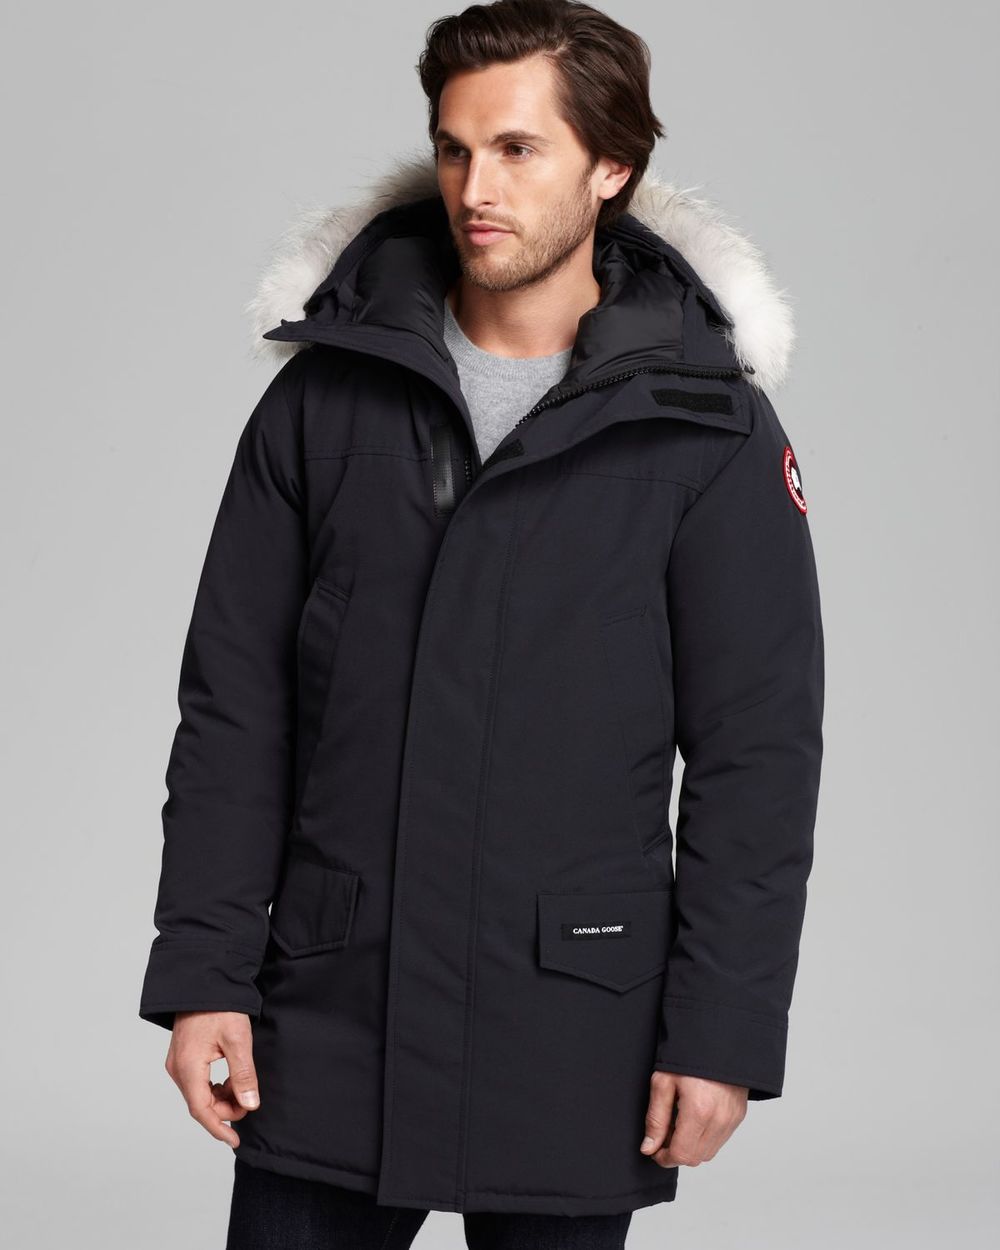 cheap canada goose citadel parka for men in red